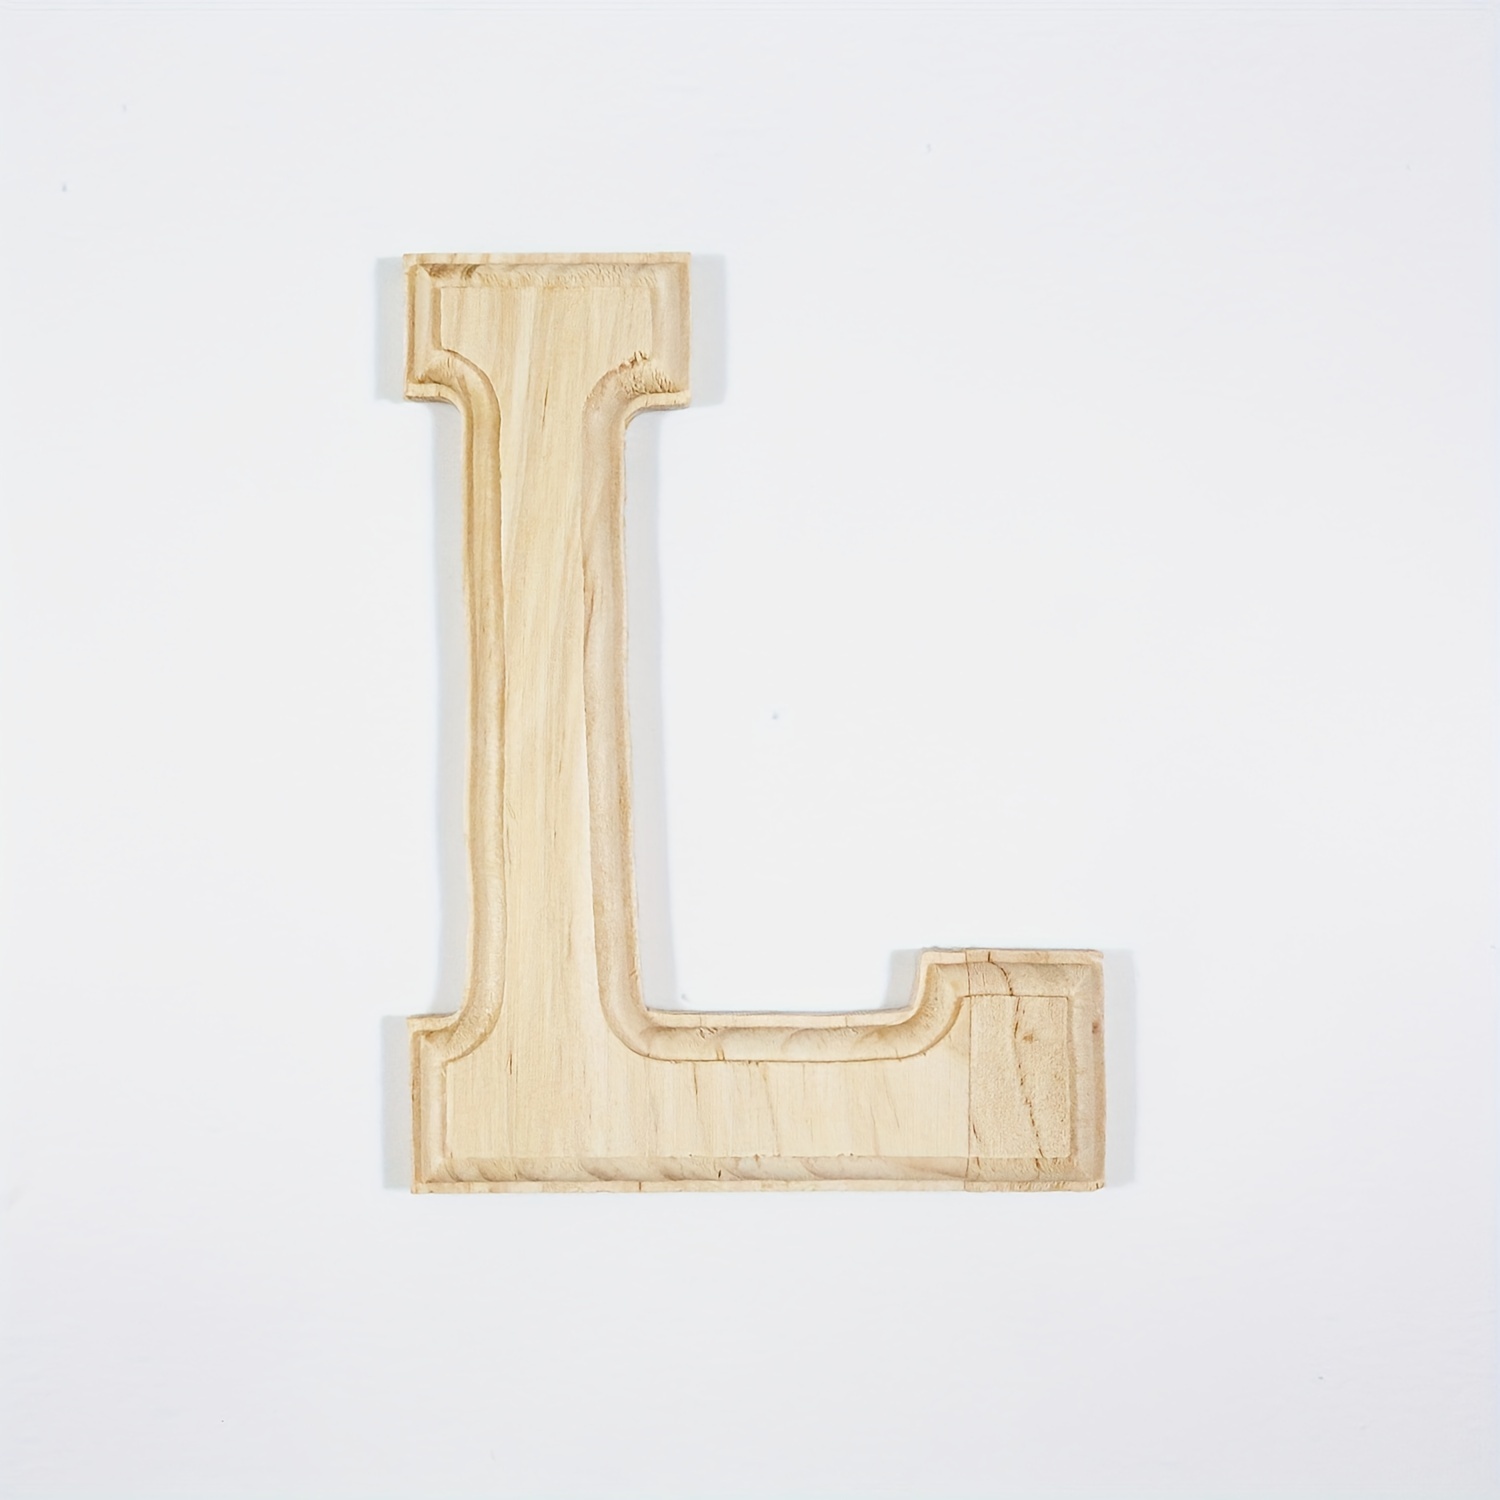 Wood Letters -1/2 Inch Regular Wood Letters or Numbers